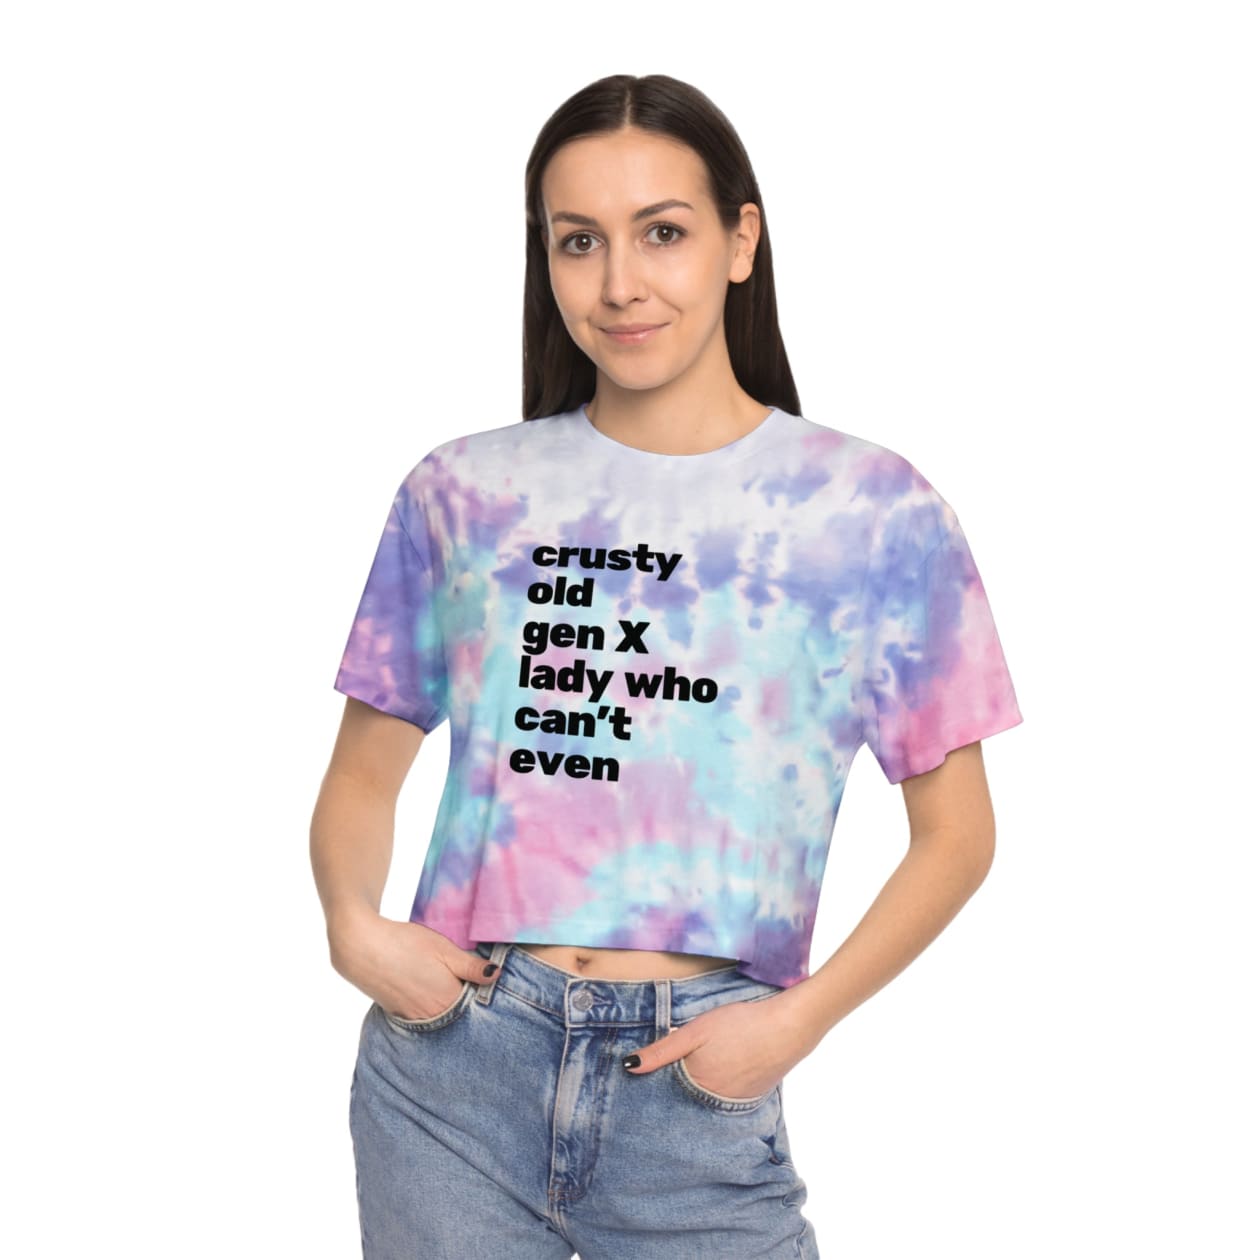 Crusty Old Gen X Lady Who Can't Even Women's Tie-Dye Crop Tee - Color: Cotton Candy, Size: XS